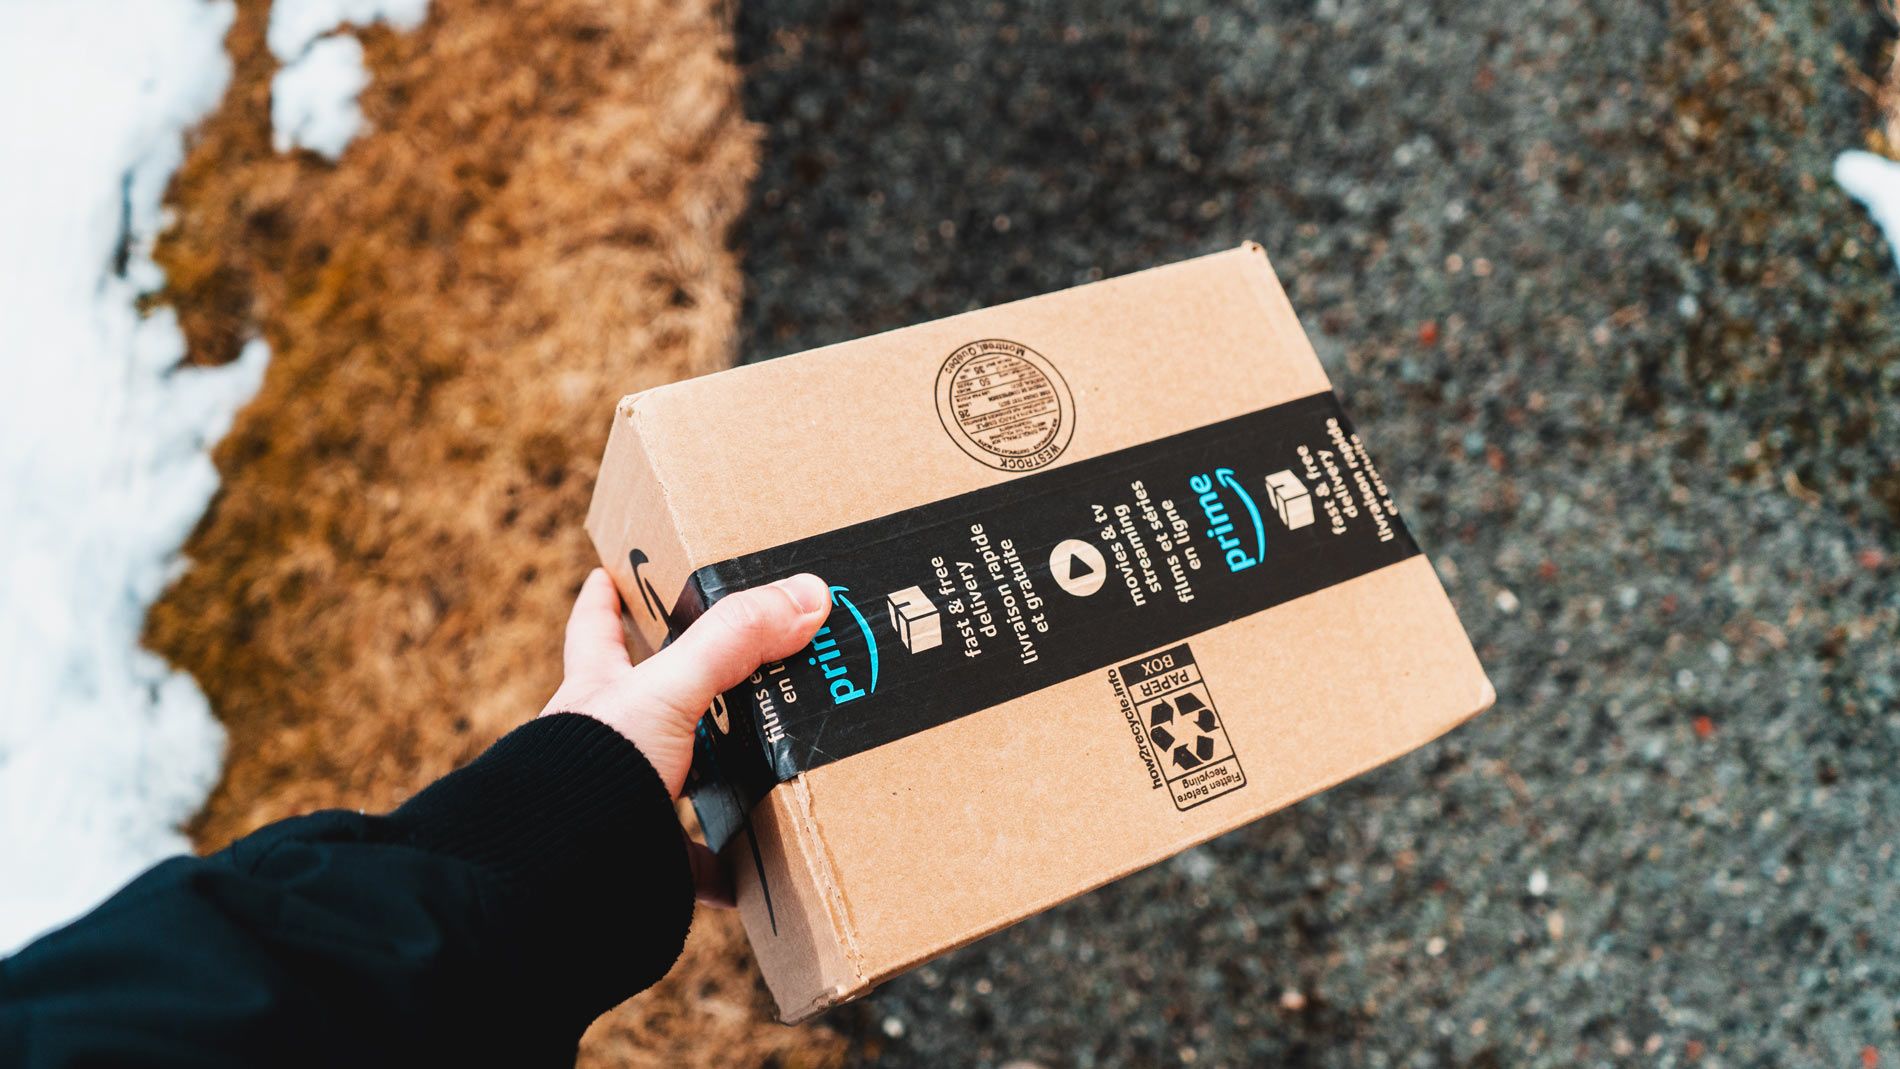 A person holds a small box sealed with Amazon Prime packing tape.